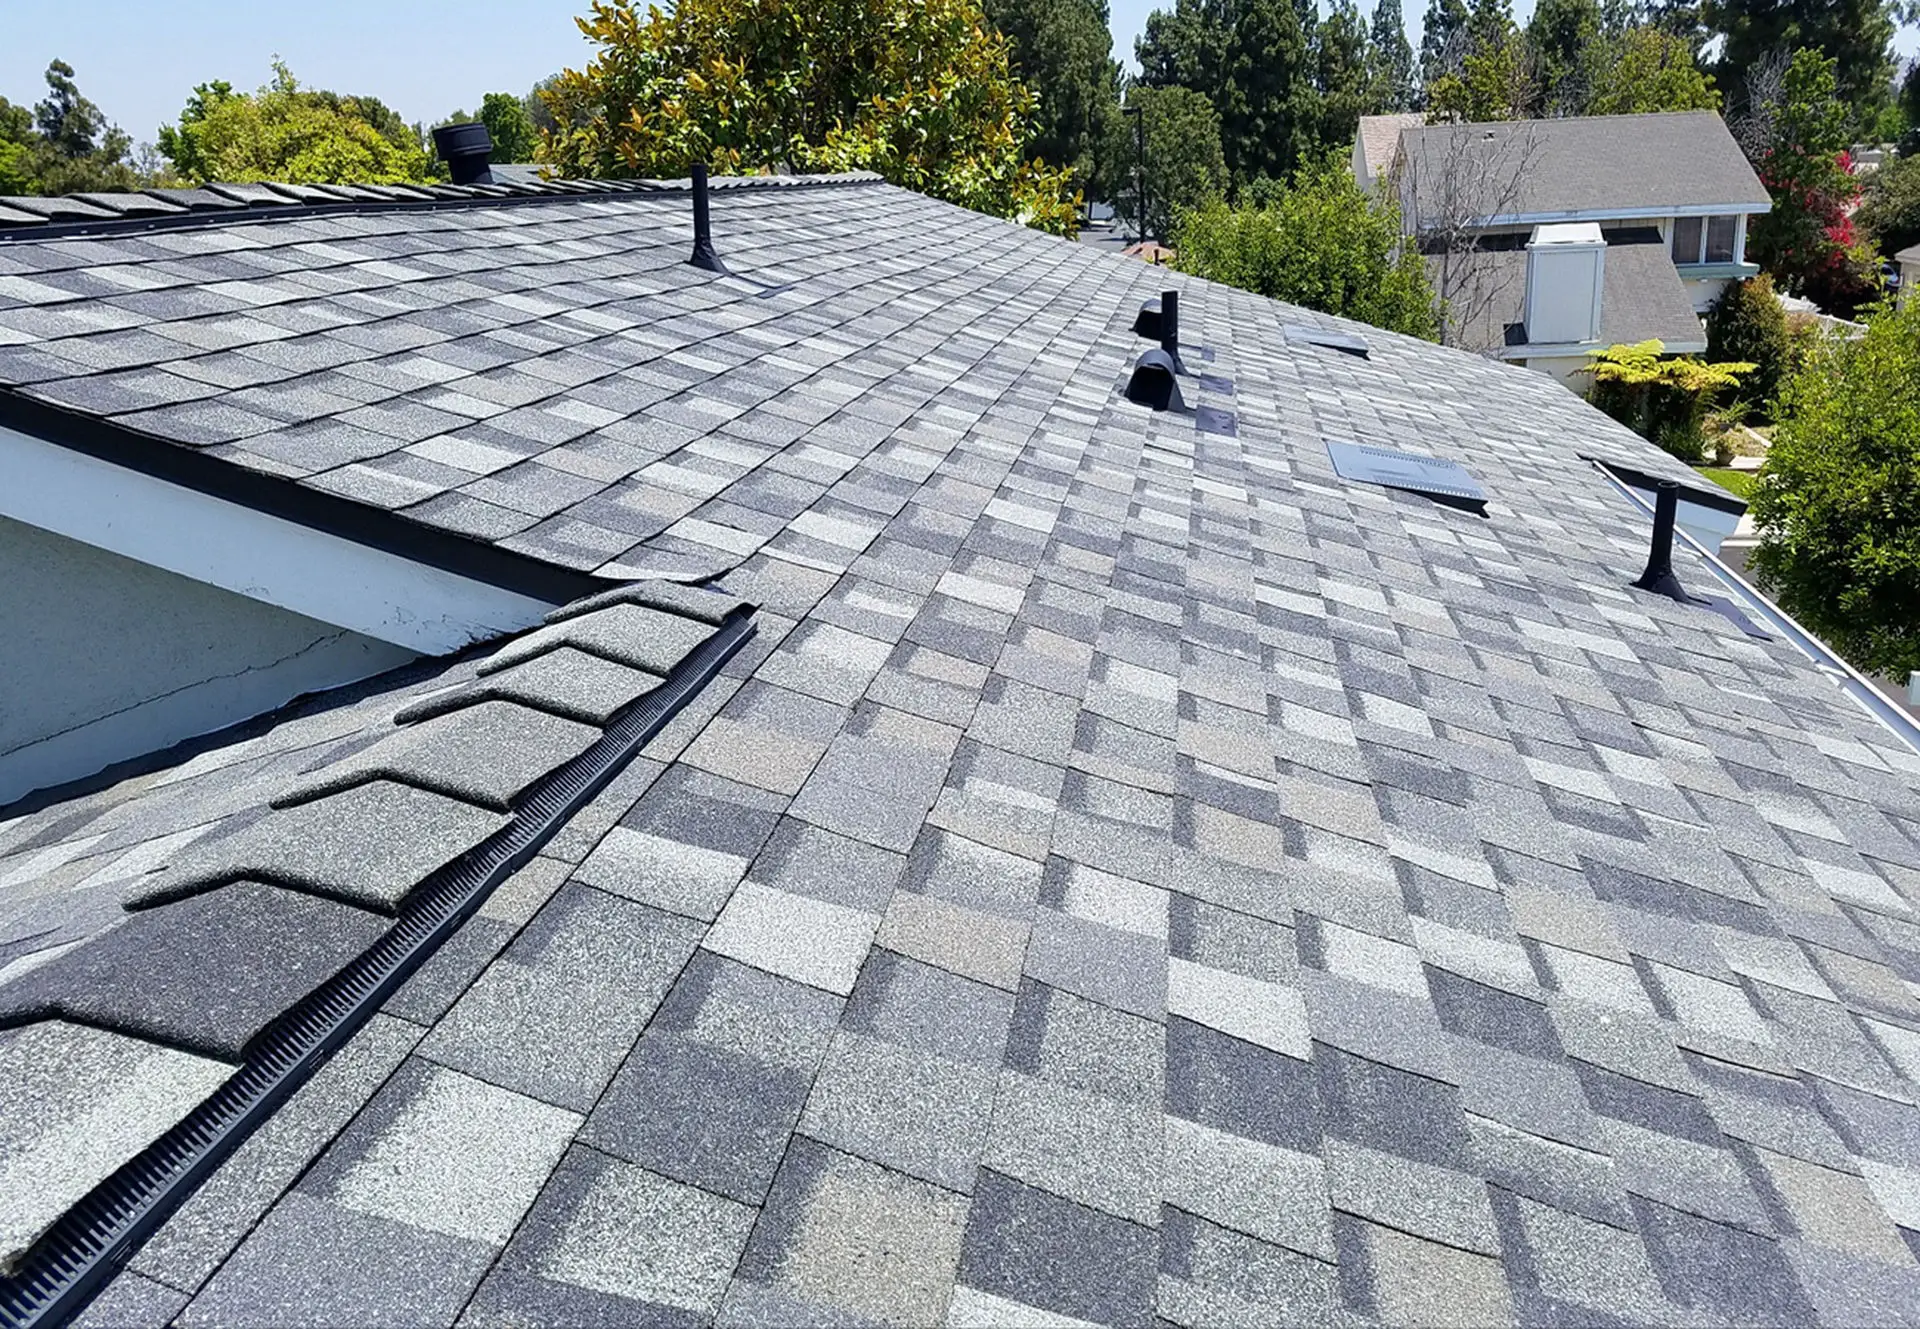 Guide to Choosing the Best Roofing Shingles for Your Home